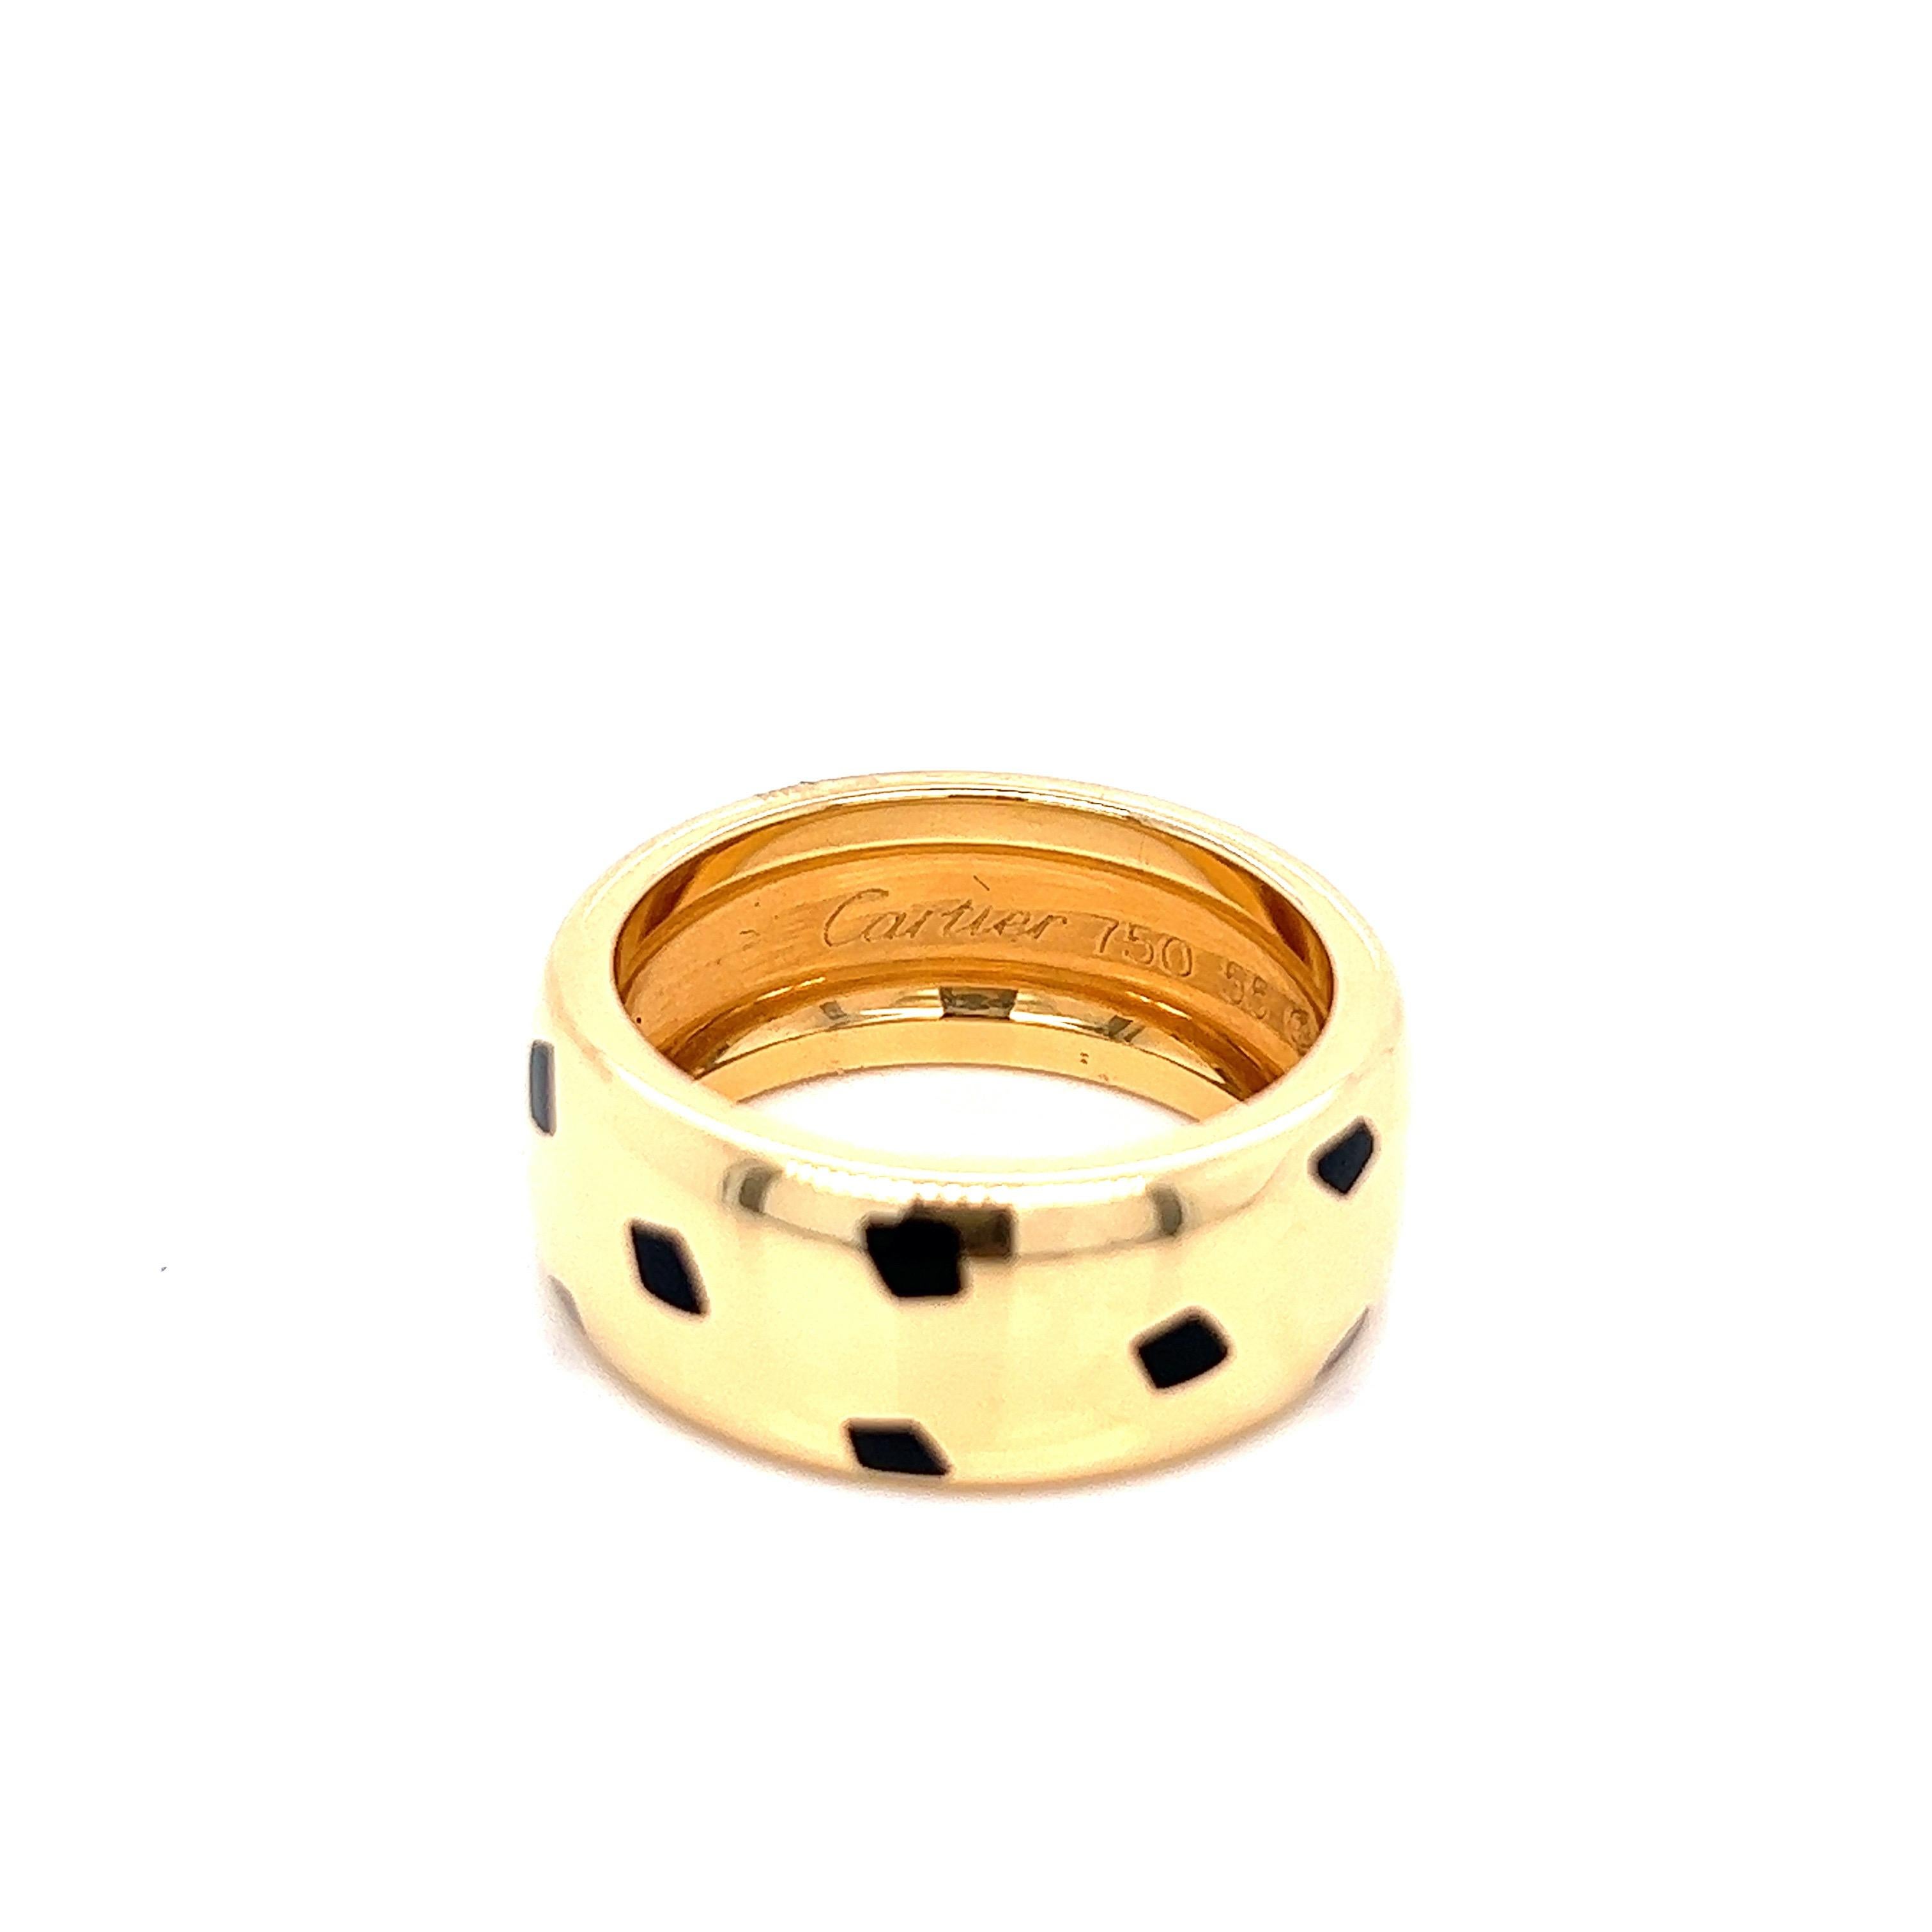 Cartier 18 karat yellow gold ring with spots of black onyx. Serial no. 70675A. Marked: Cartier / 750 / 55 / 70675A. Total weight: 14.7 grams. Width of band: approximately 9 mm. Size 7.5. 